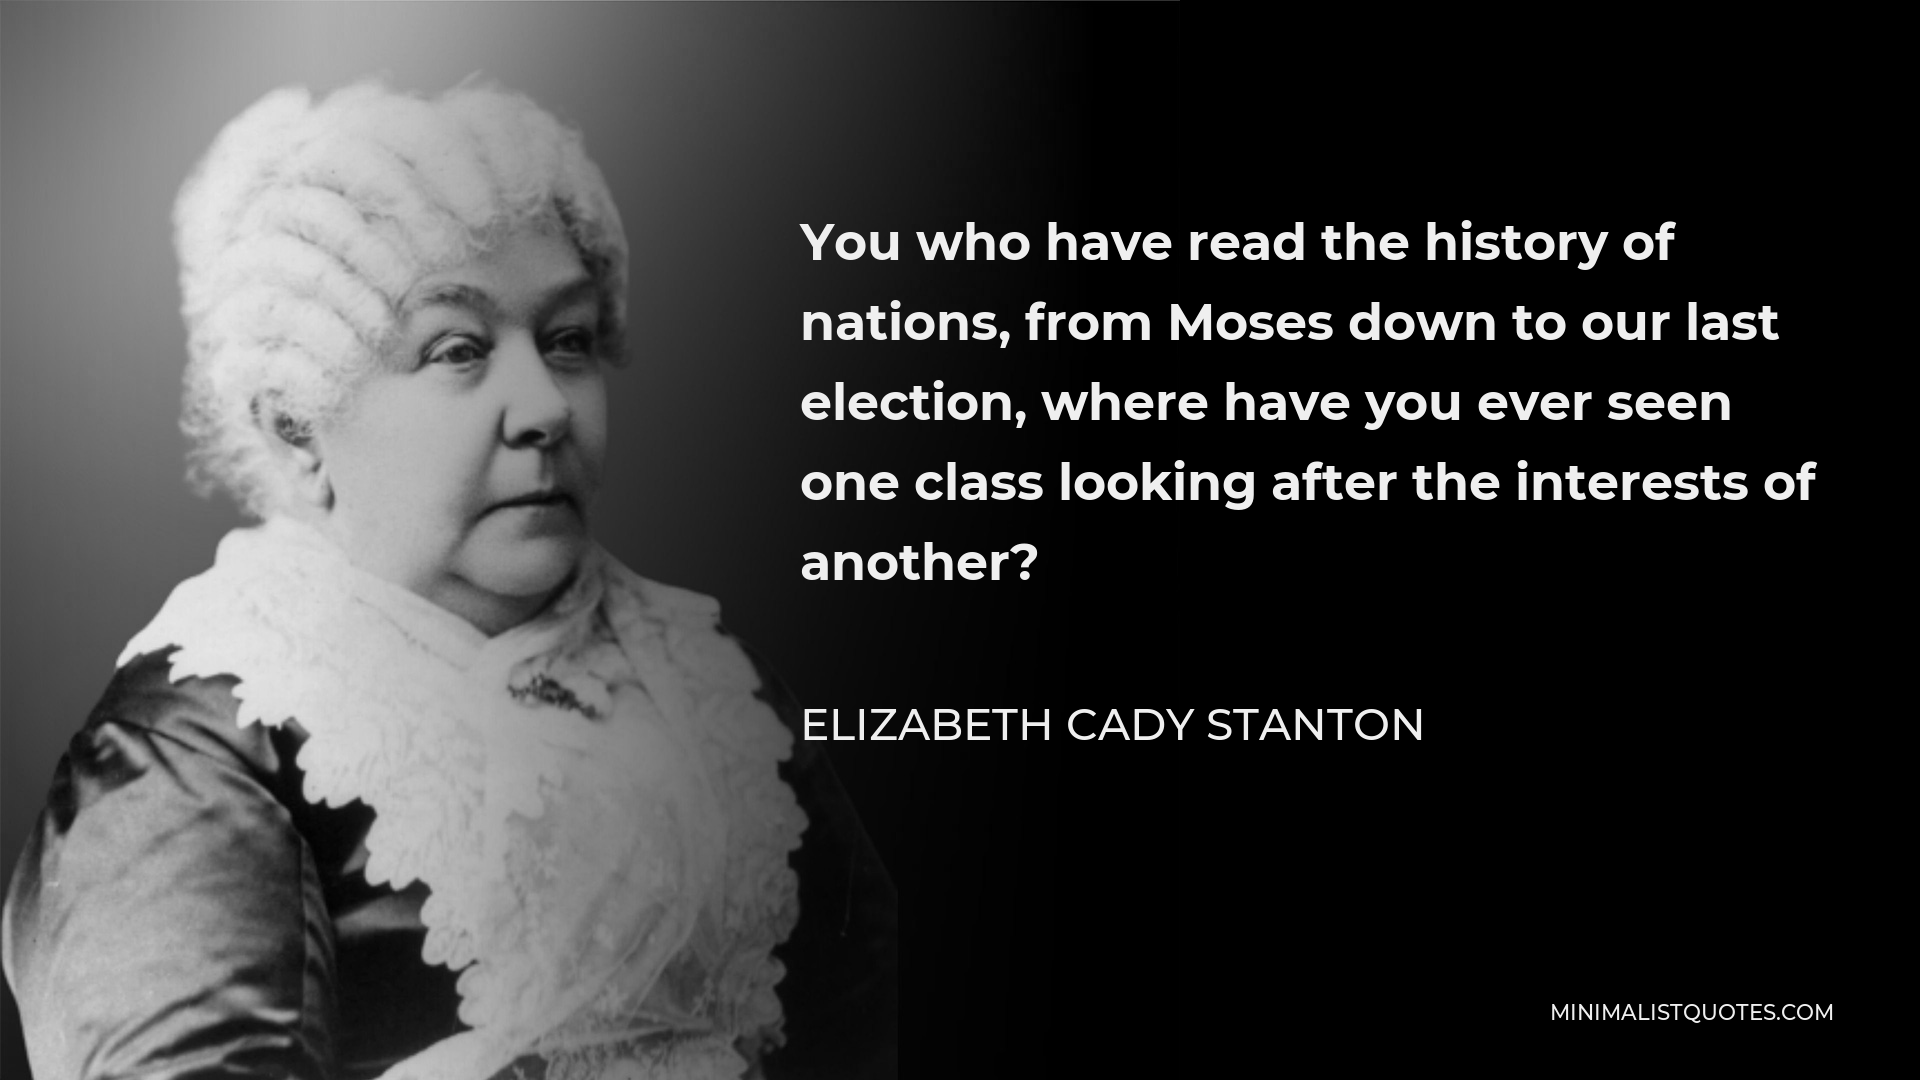 Elizabeth Cady Stanton Quote - You who have read the history of nations, from Moses down to our last election, where have you ever seen one class looking after the interests of another?